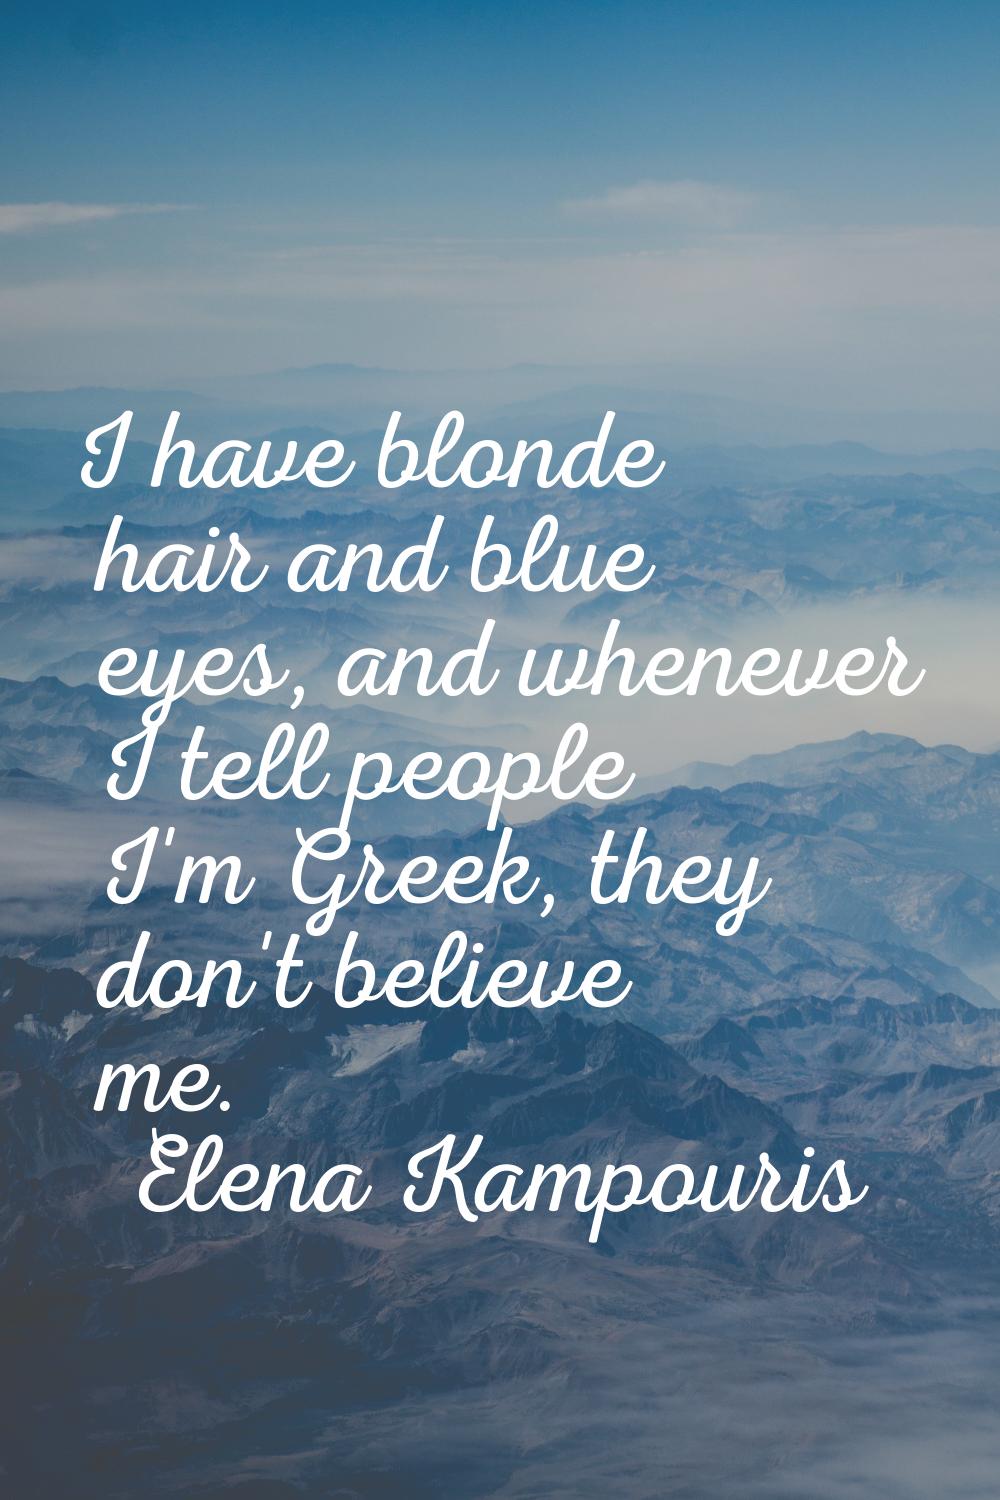 I have blonde hair and blue eyes, and whenever I tell people I'm Greek, they don't believe me.